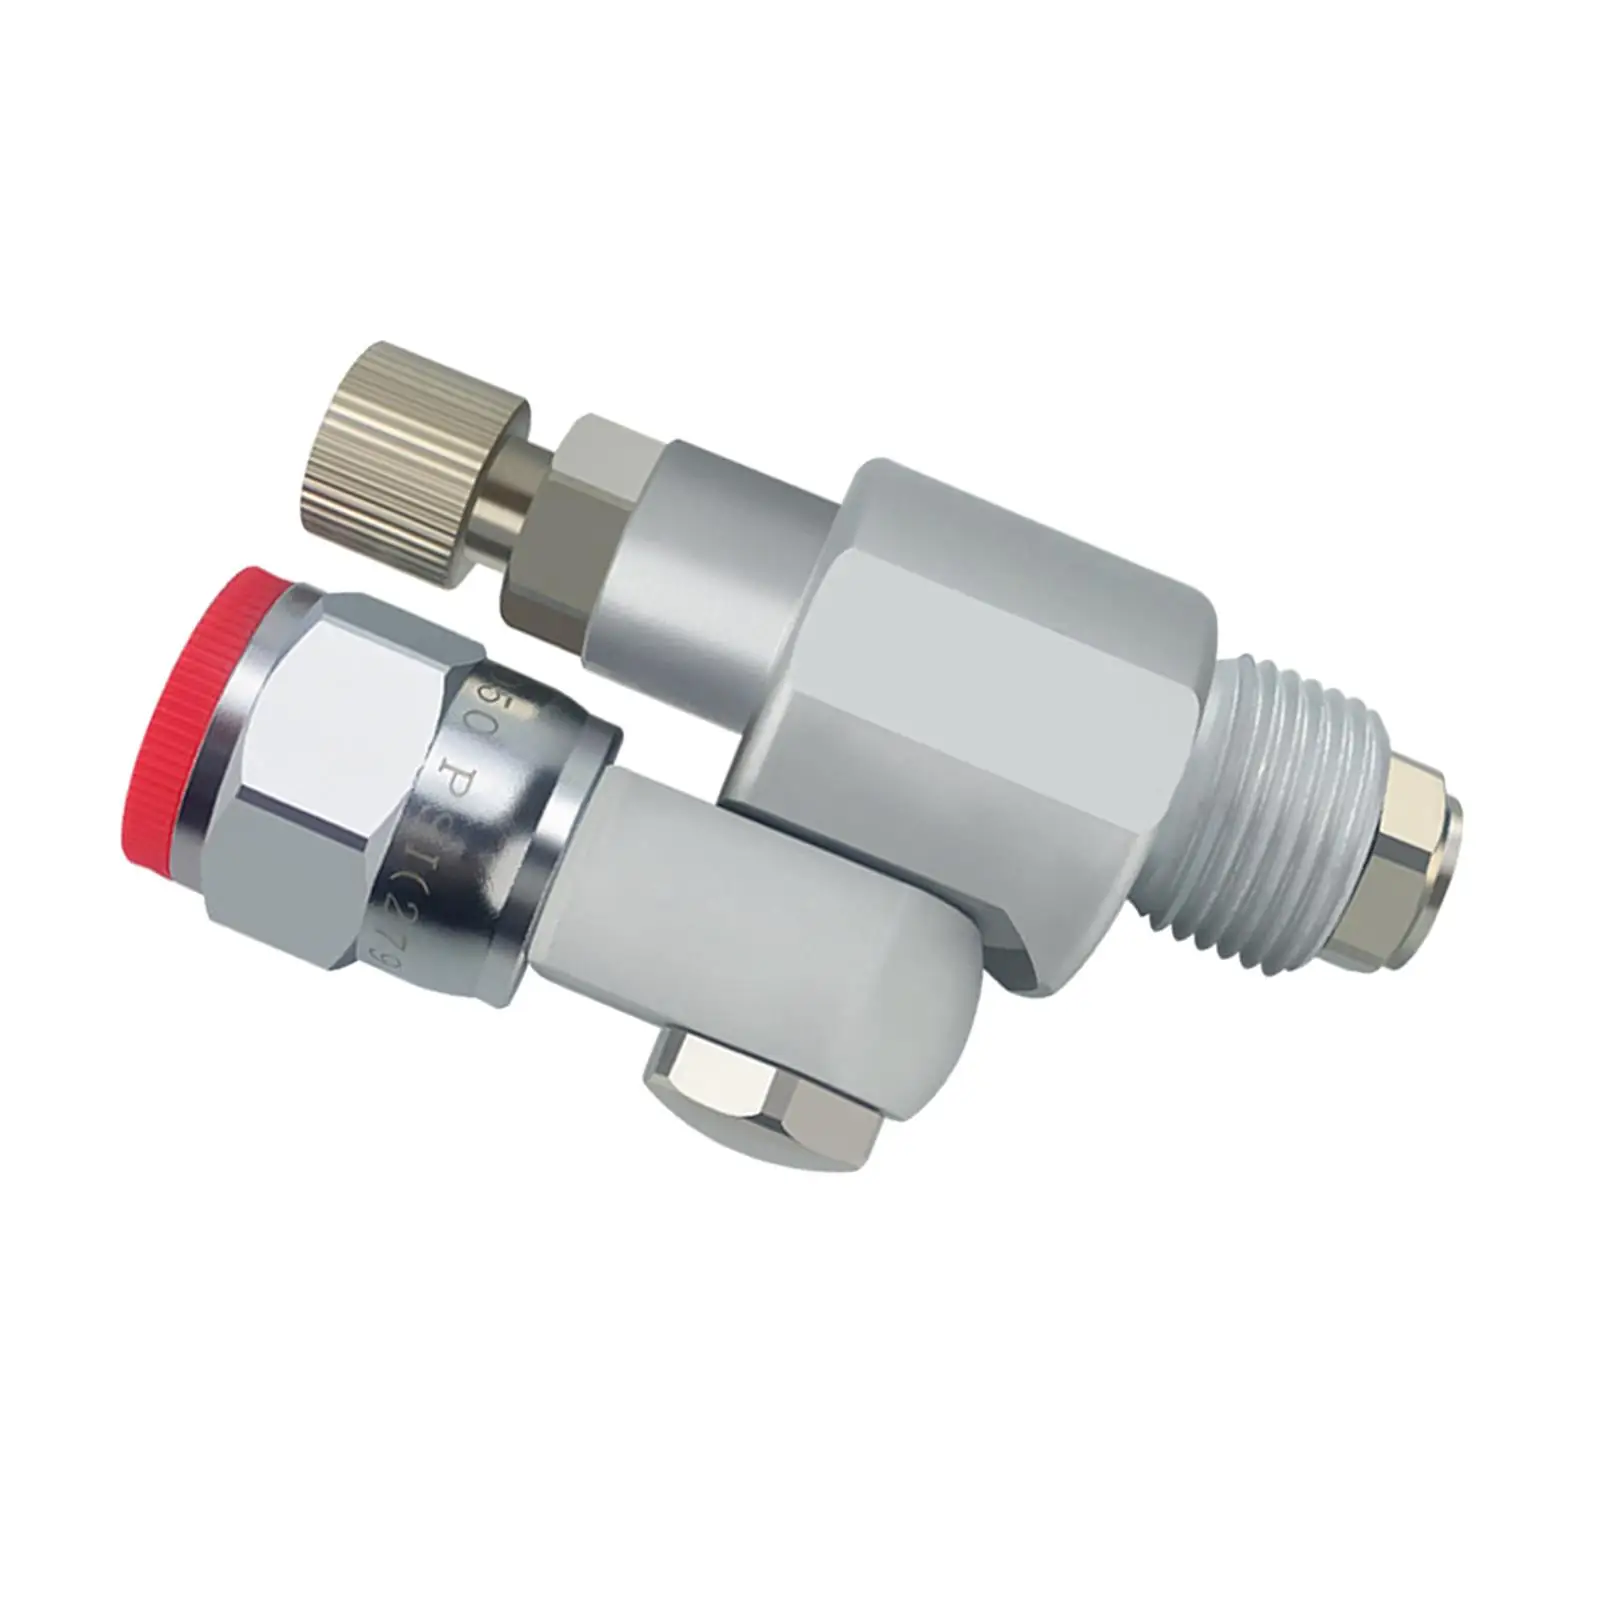 Metal Joint Adapter Replacement 7/8 inch Shut Off Value Universal Joint Valve 287030 Airless Spray Extension Accs